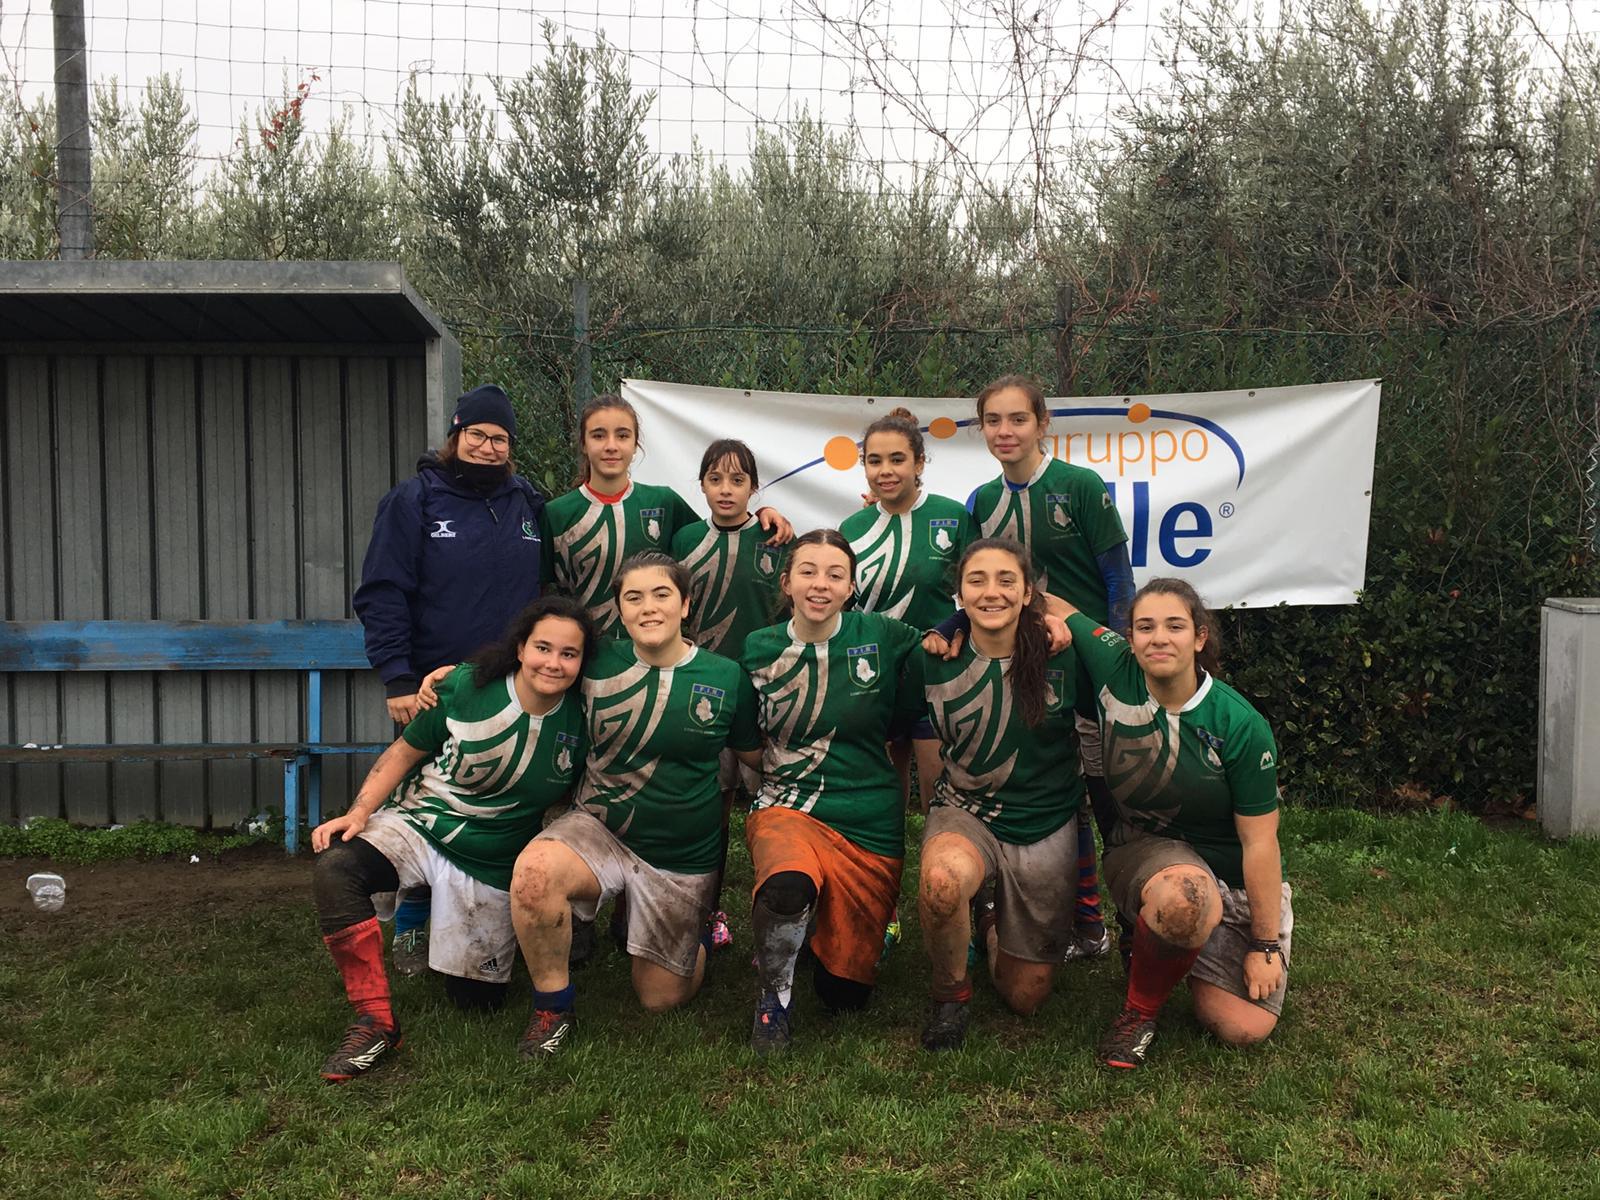 Rugby rosa in Umbria, due orvietane convocate